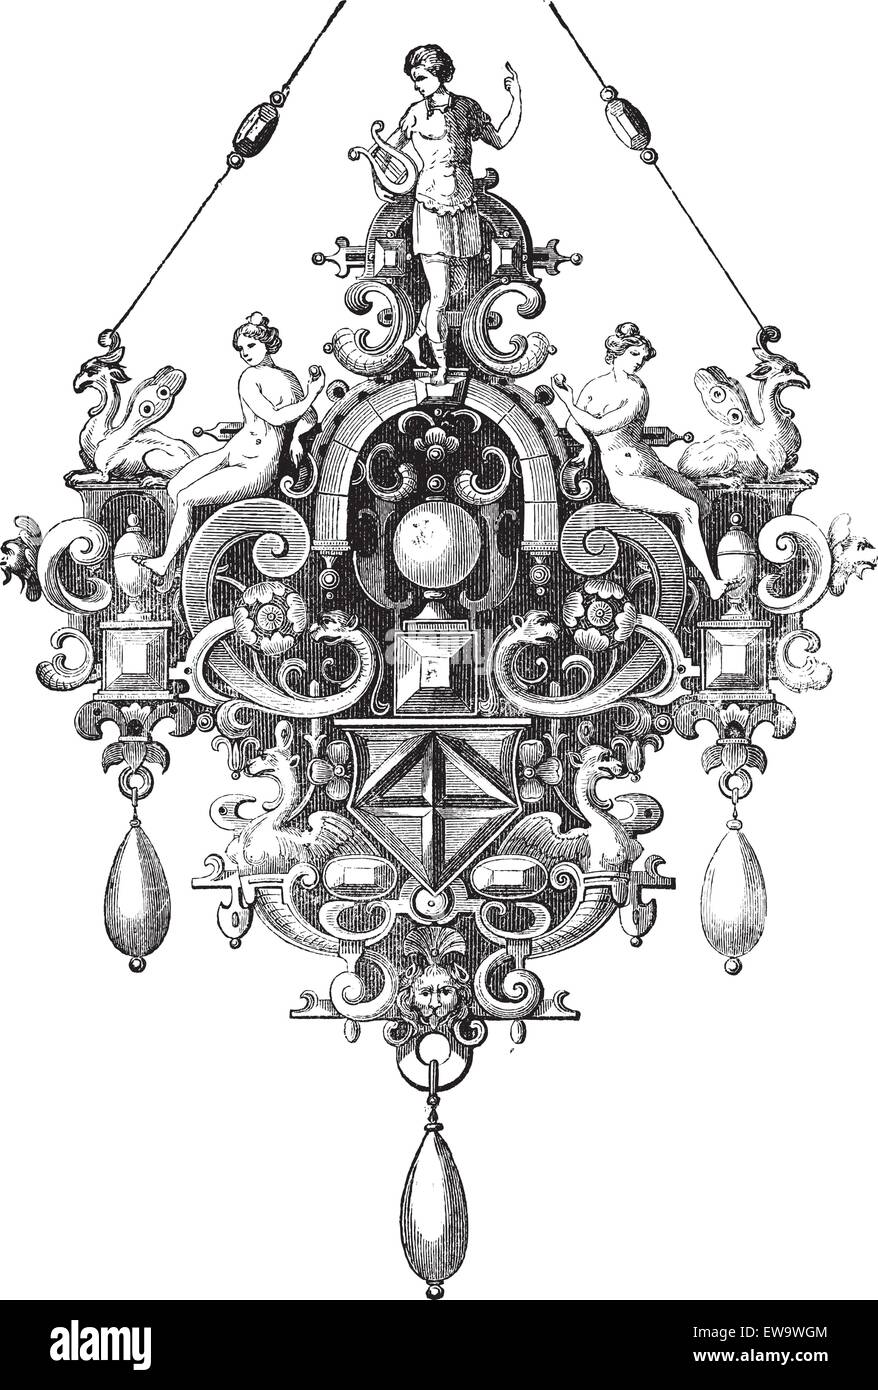 Old engraved illustration of Pendant of Benvenuto Cellini from the Cabinet des Medailles, National Library, France, isolated on a white background.  Industrial encyclopedia E.-O. Lami - 1875. Stock Vector